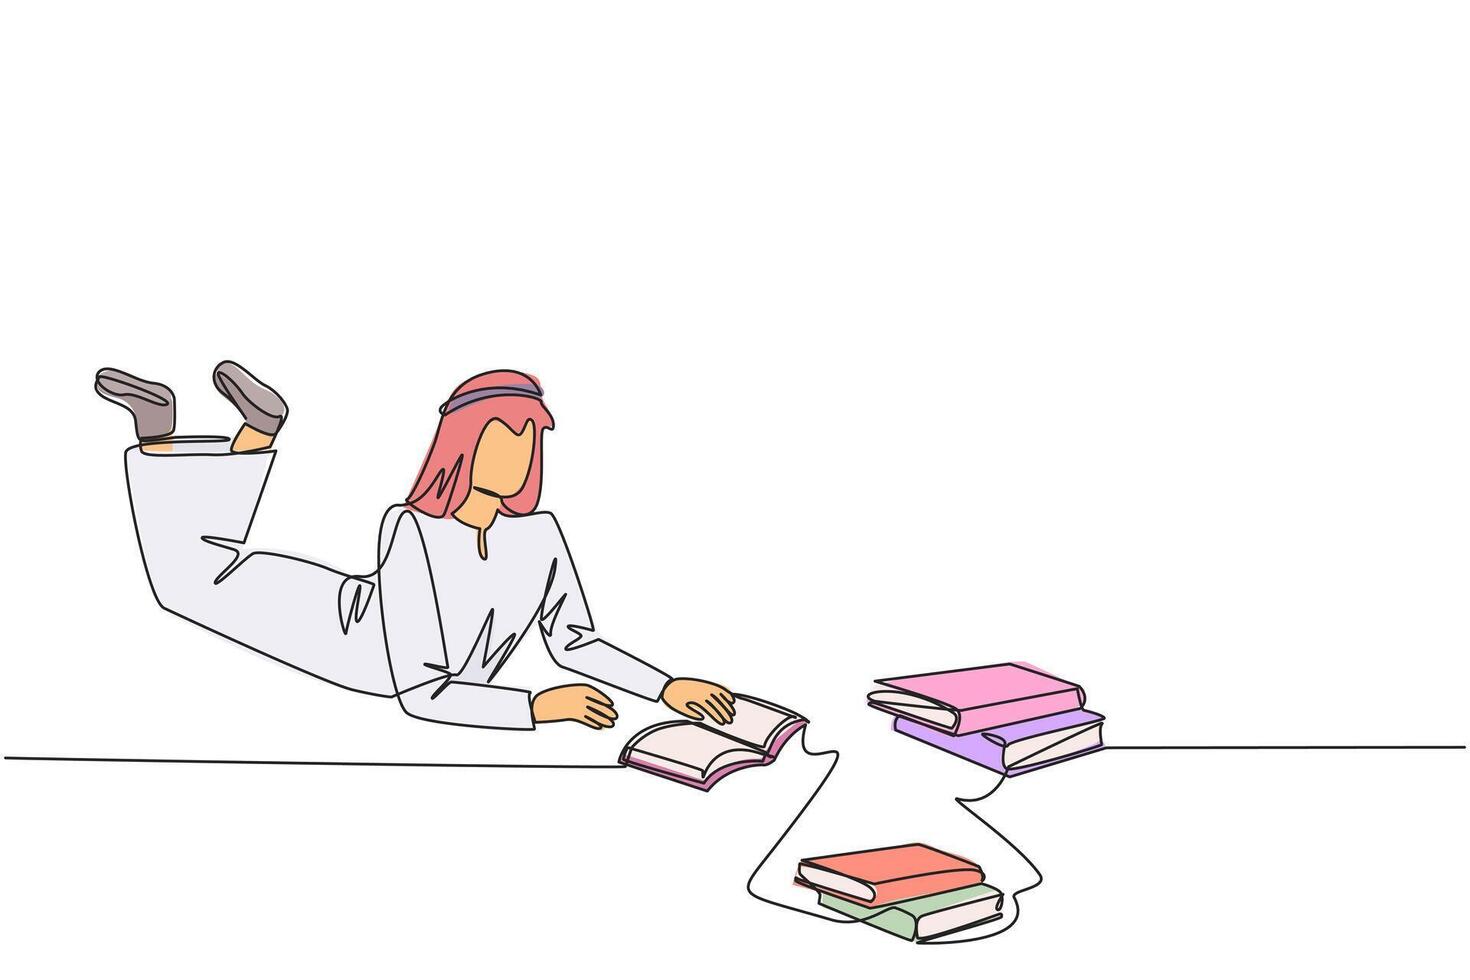 Continuous one line drawing Arabian man really likes reading. Everyday one book is read. Good habit. There is no day without reading book. Book festival concept. Single line design illustration vector